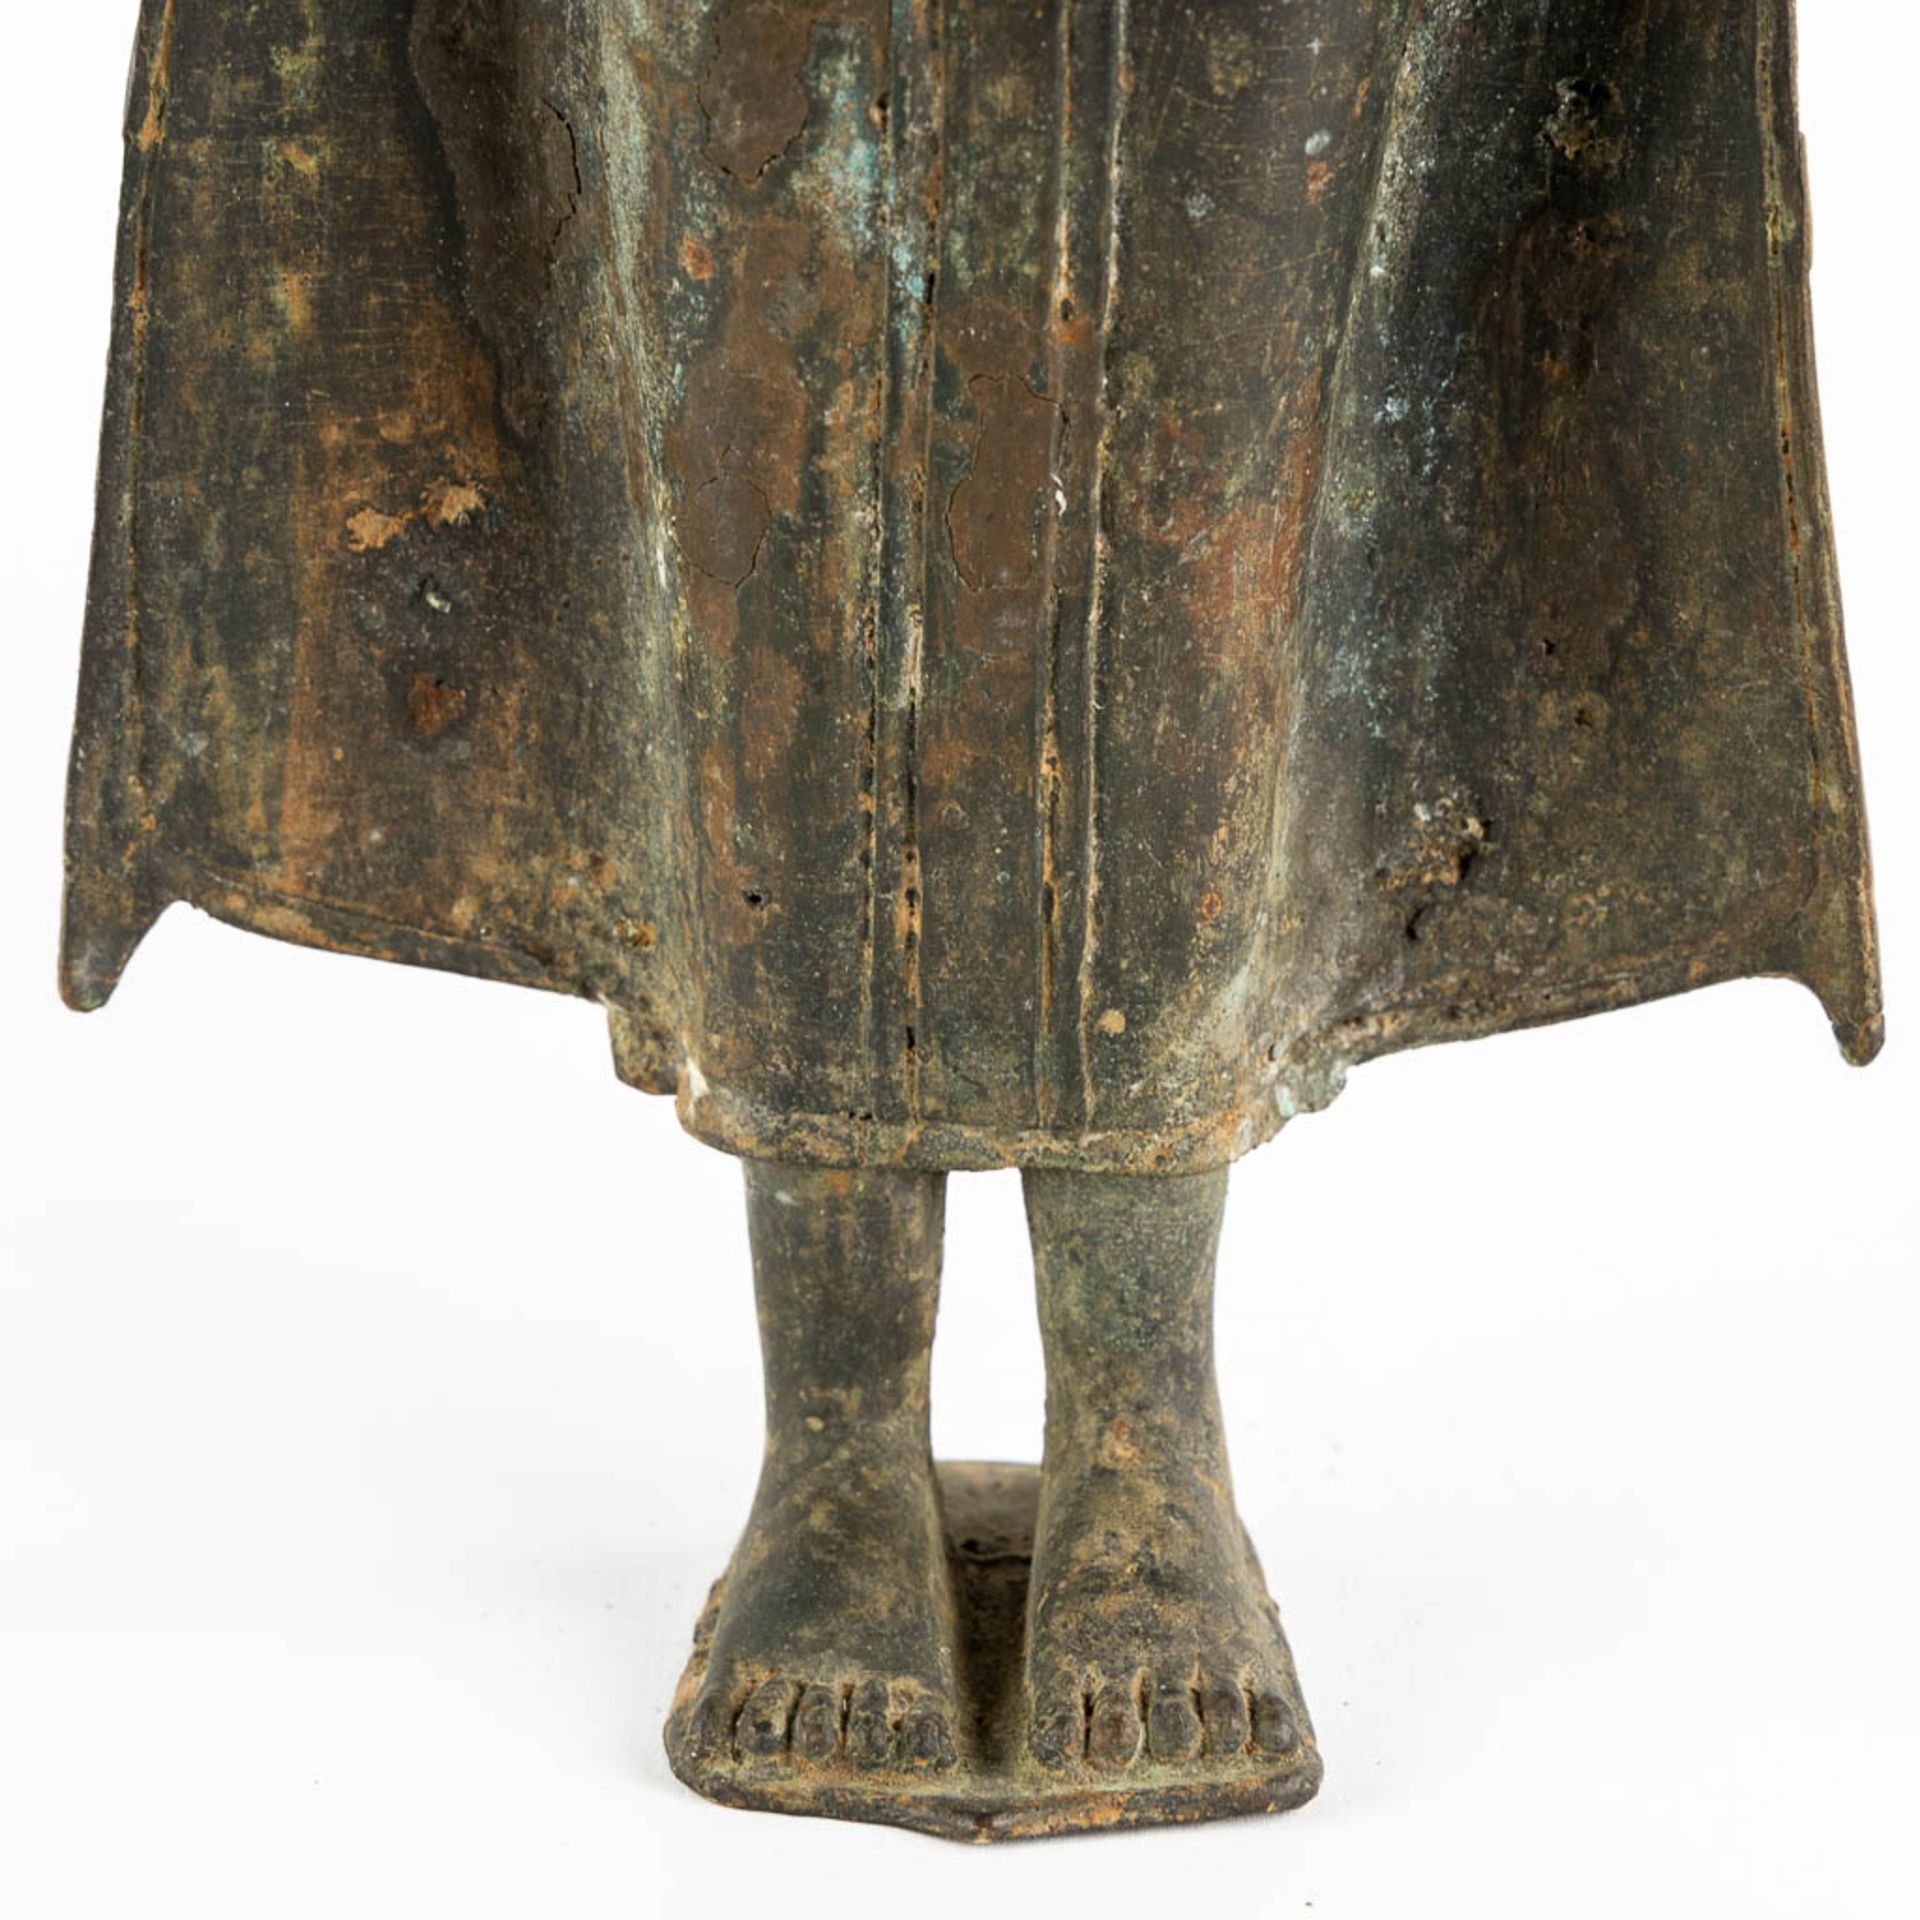 A Thai figurine of a standing Buddha, Patinated bronze. (W:16 x H:44 cm) - Image 8 of 10